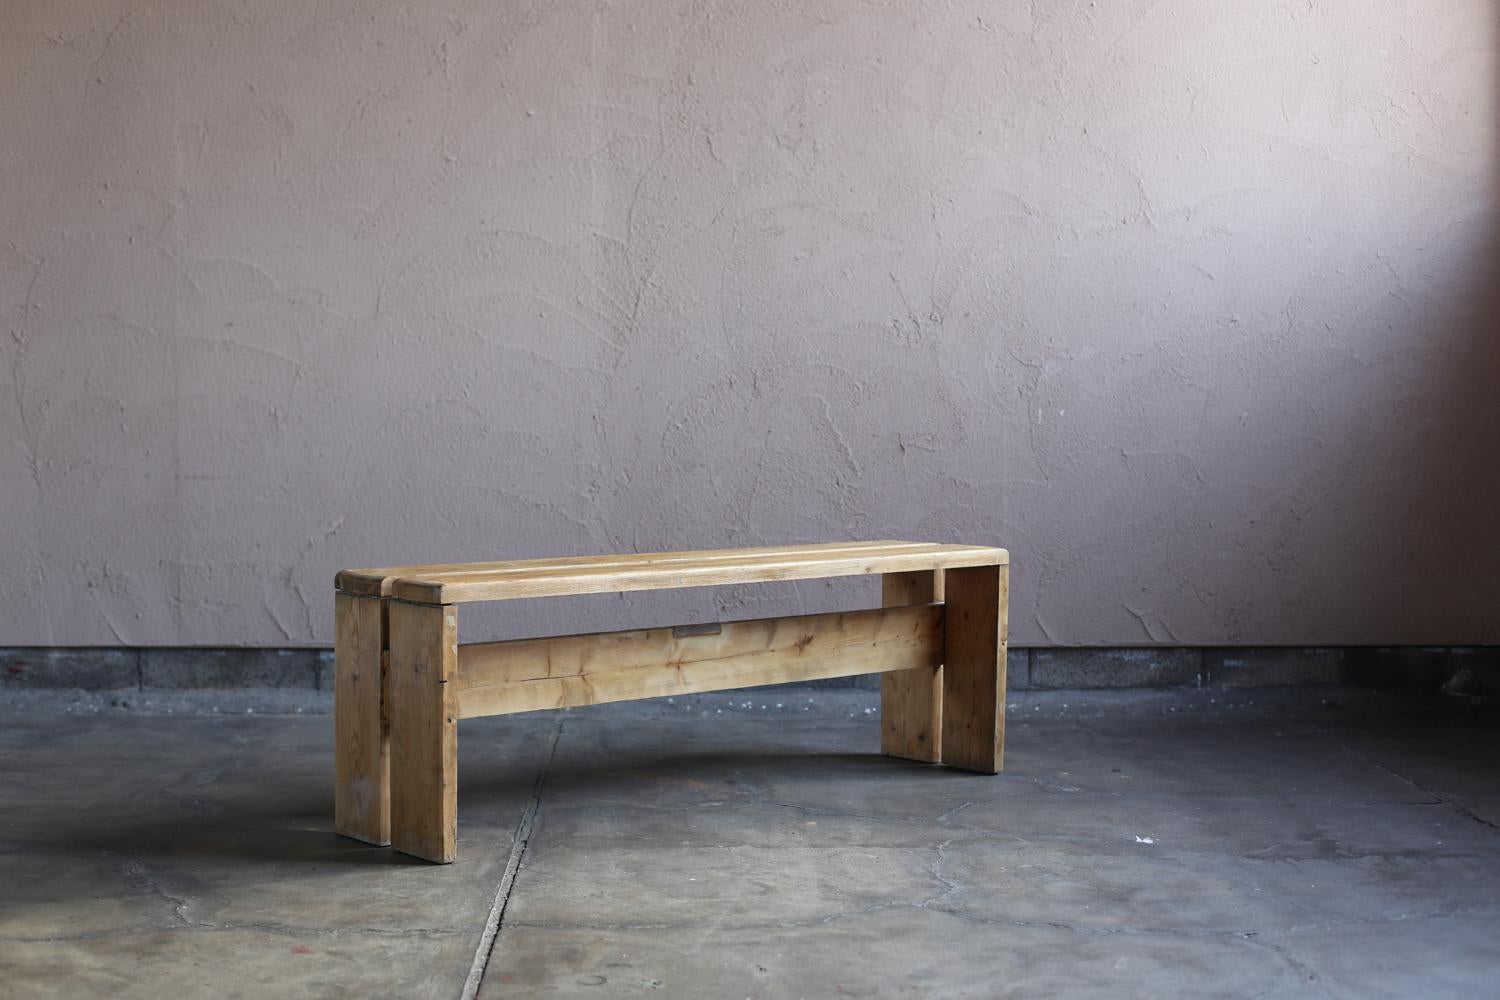 A 3 seater bench designed under the supervision of Charlotte Perriand for Les Arcs, a French ski resort.